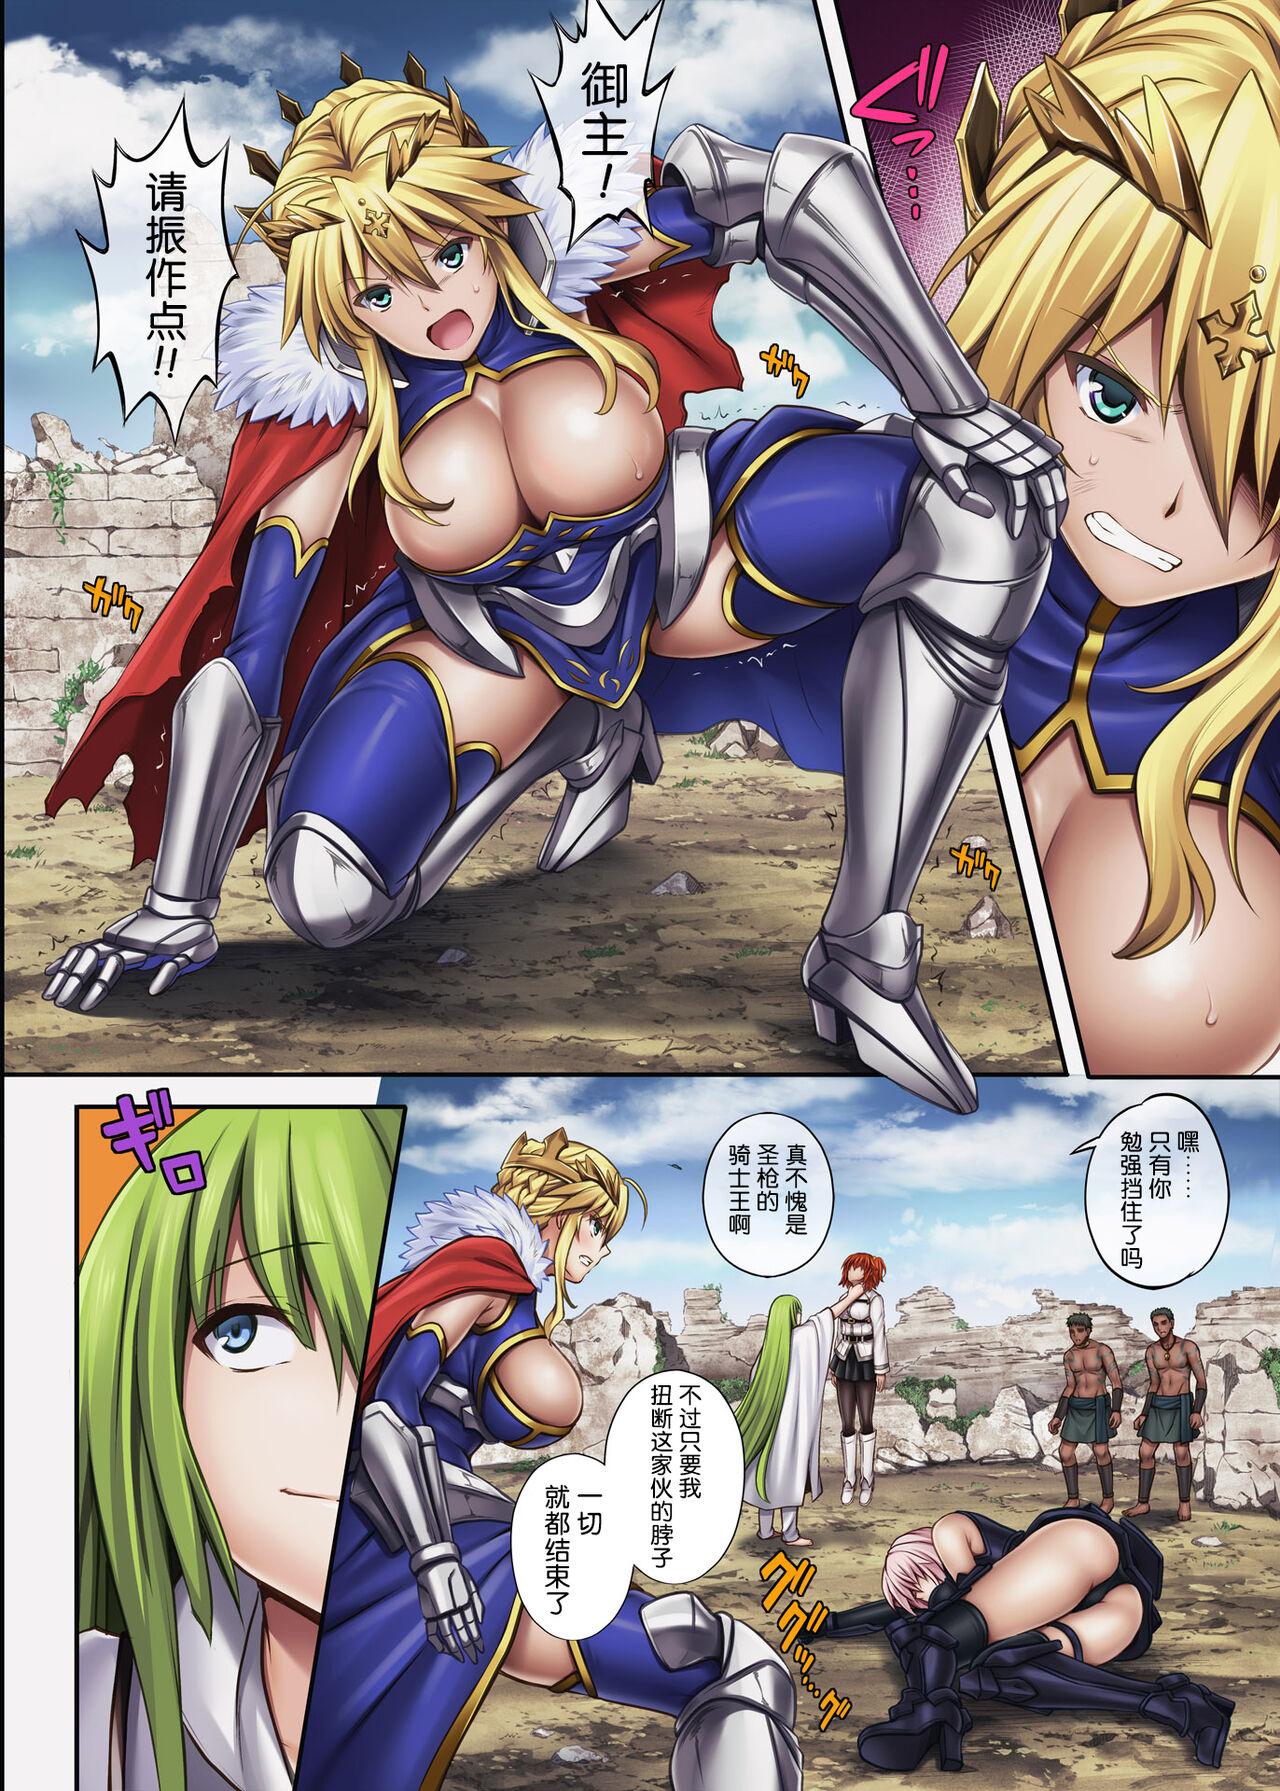 Stepmom Cyclone no Doujinshi Full Color Pack 4 - Fate grand order Blow Job - Page 4